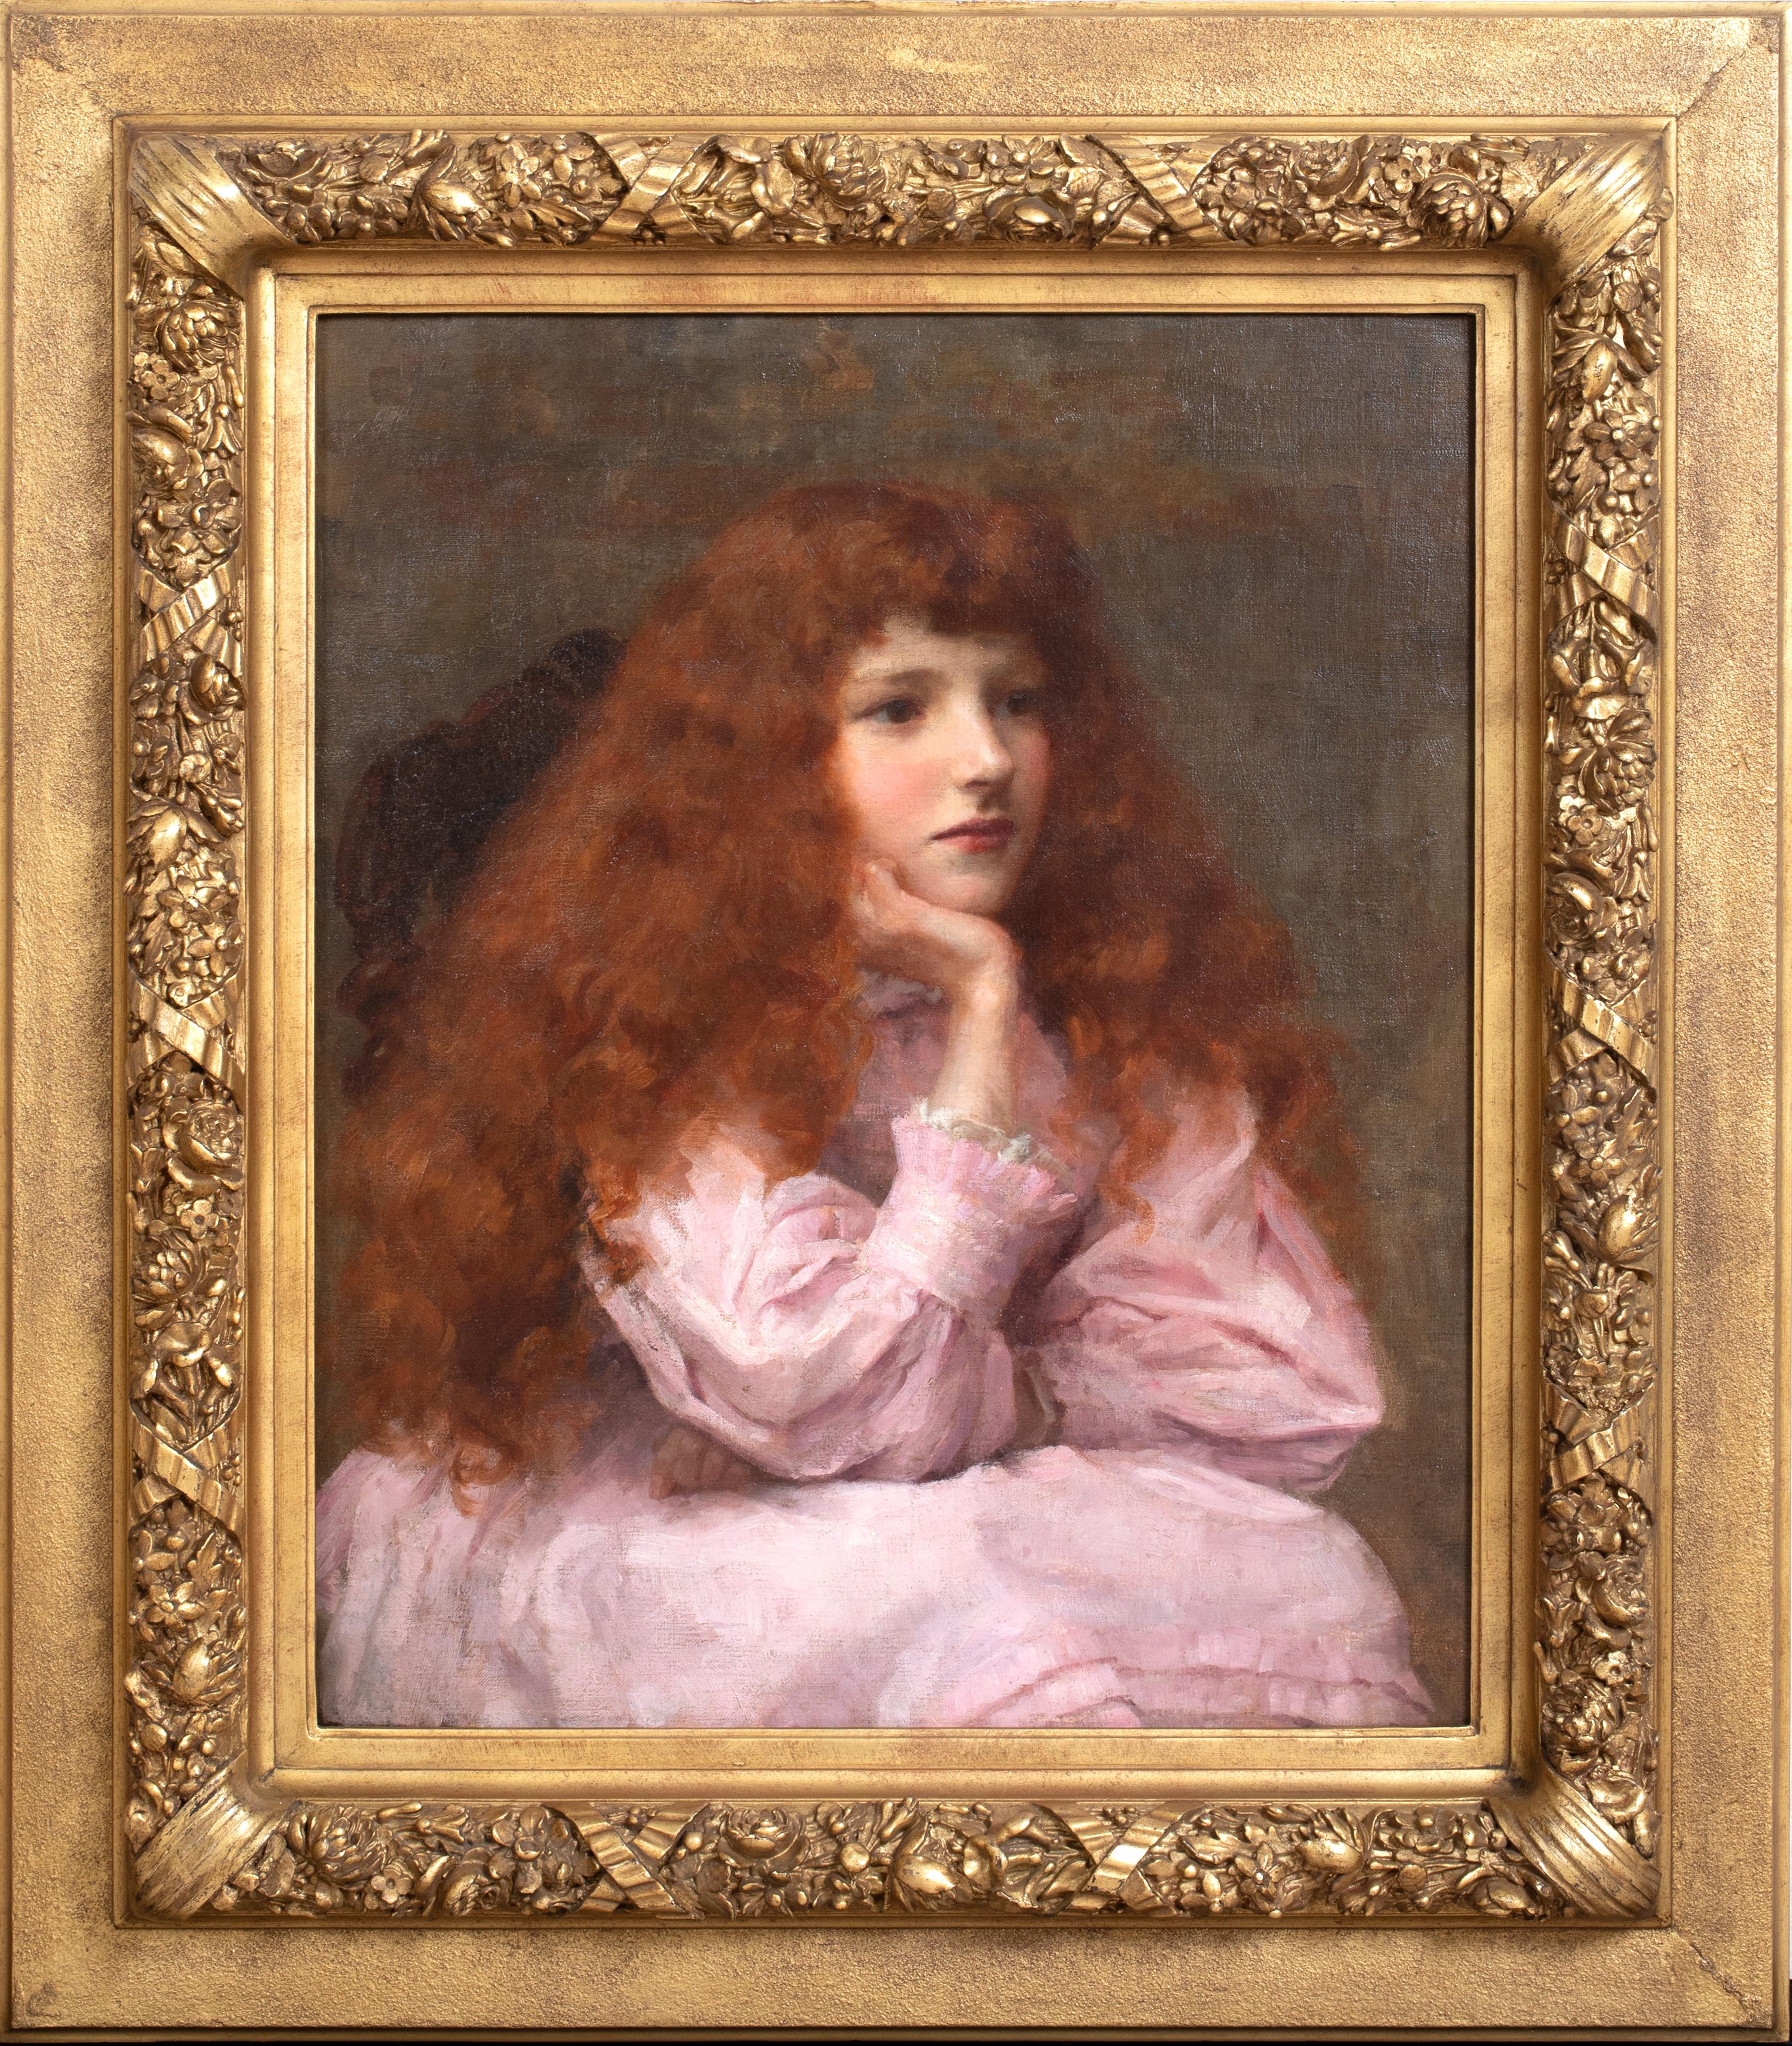 George Sheridan Knowles Portrait Painting - Portrait Of A Redhaired Girl In Pink, 19th Century  George Sheridan KNOWLES 